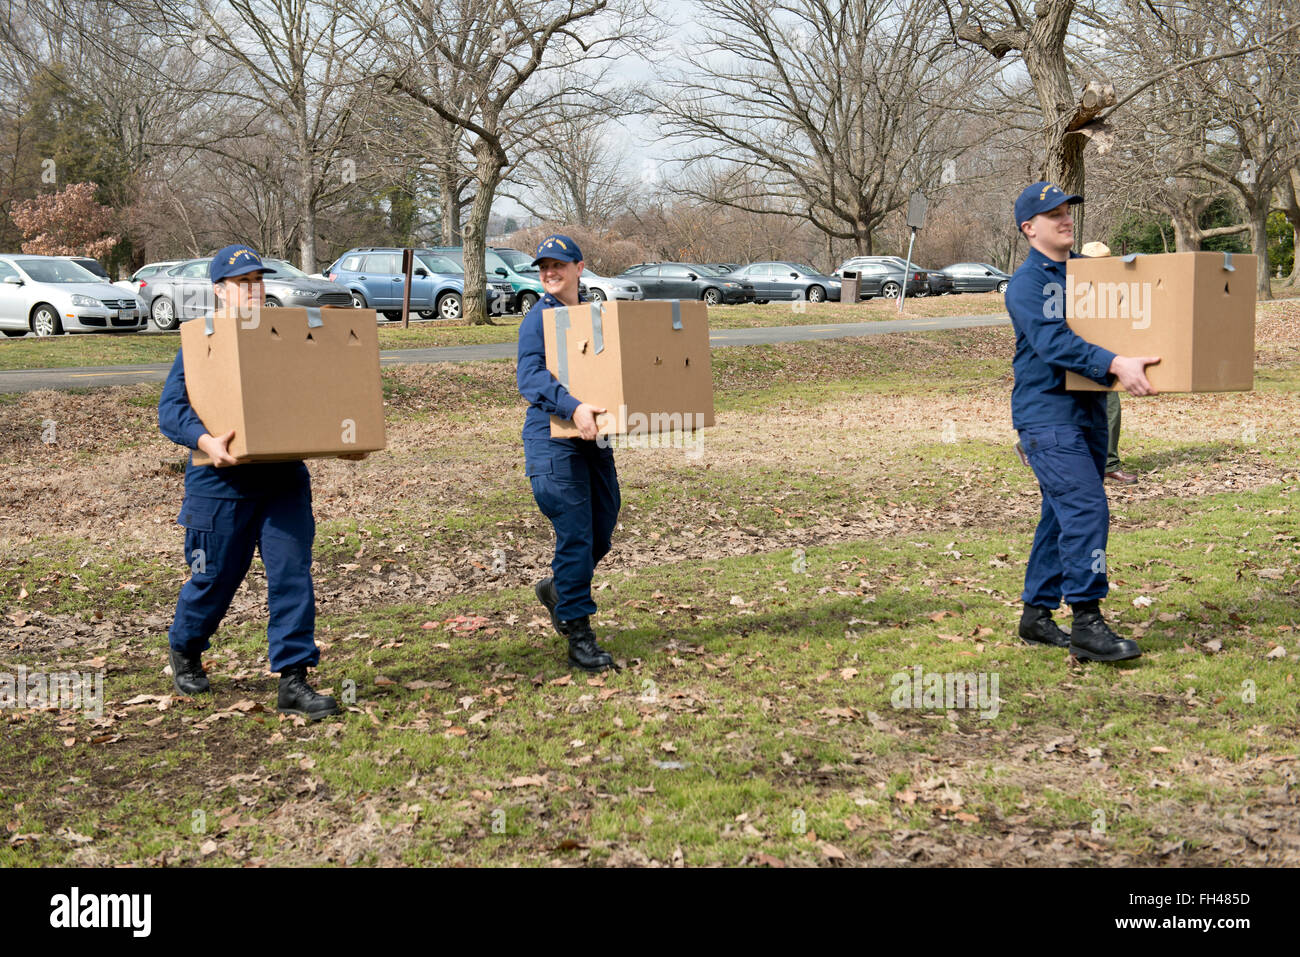 Lt. j.g. Karinne Merical, Petty Officer 3rd Class Laurel Siegrist and Petty Officer 3rd Class Christopher Worth, members the incident management division at Coast Guard Sector Baltimore, carry boxes containing rehabilitated Canada geese near Belle Haven Marina in Alexandria, Va., Monday, Feb. 22, 2016. The geese were released into the wild after being rehabilitated by Tri-State Bird Rescue and Research. Stock Photo